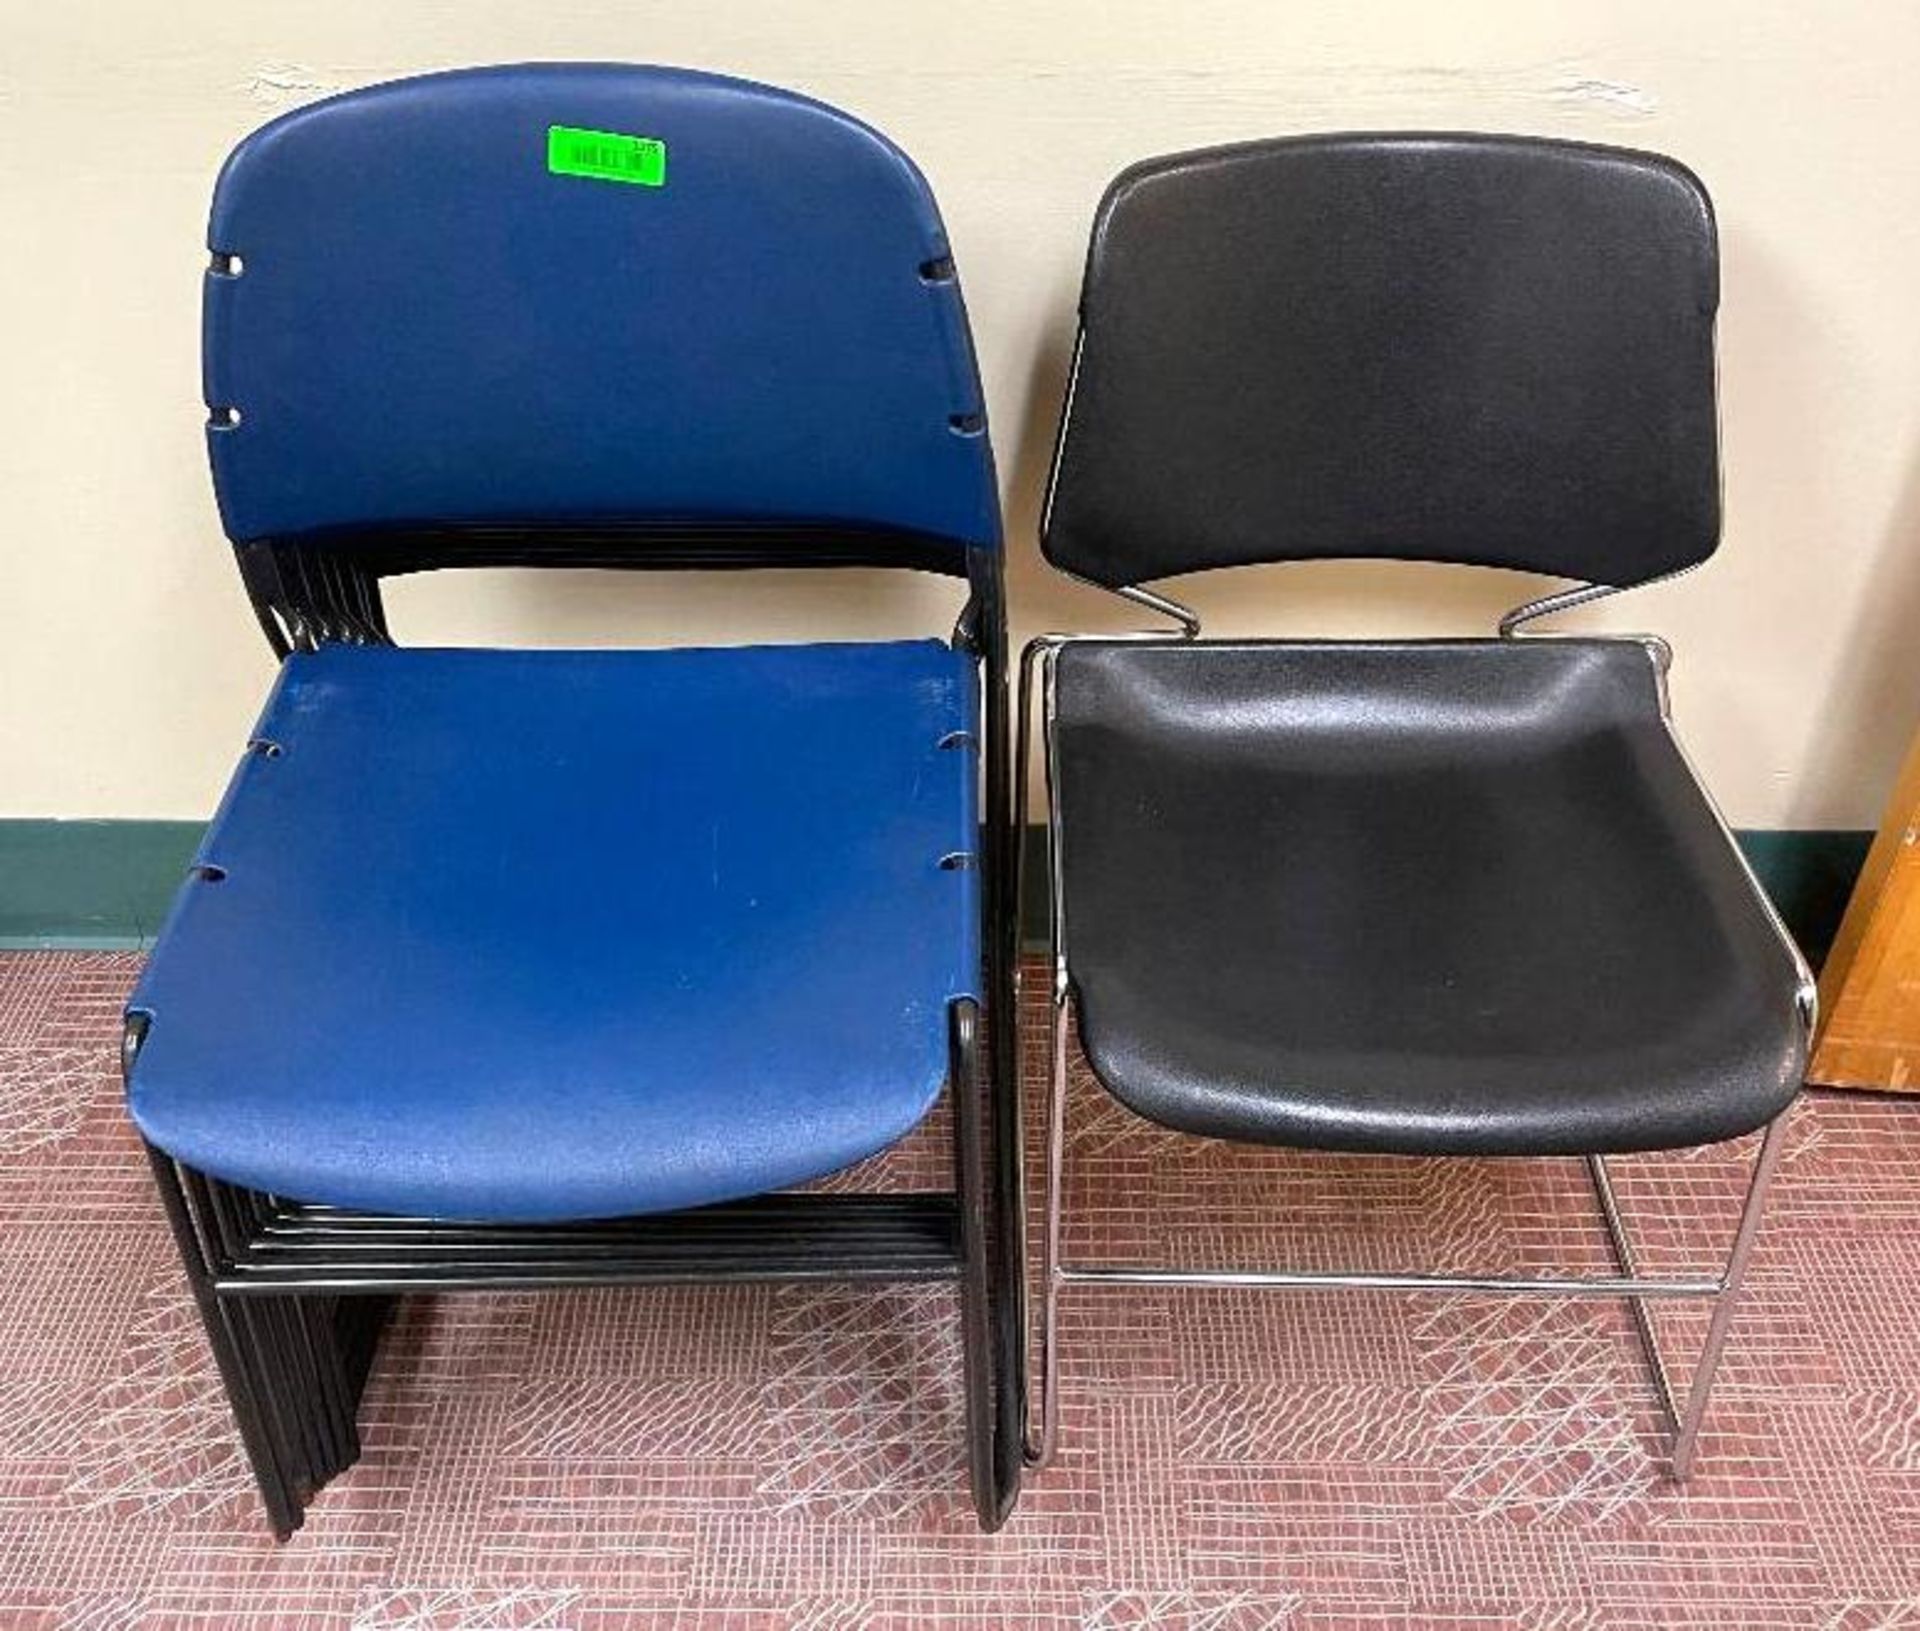 DESCRIPTION (8) ASSORTED STACKABLE CHAIRS LOCATION ROOM 21: (GROUP ROOM) THIS LOT IS ONE MONEY QUANT